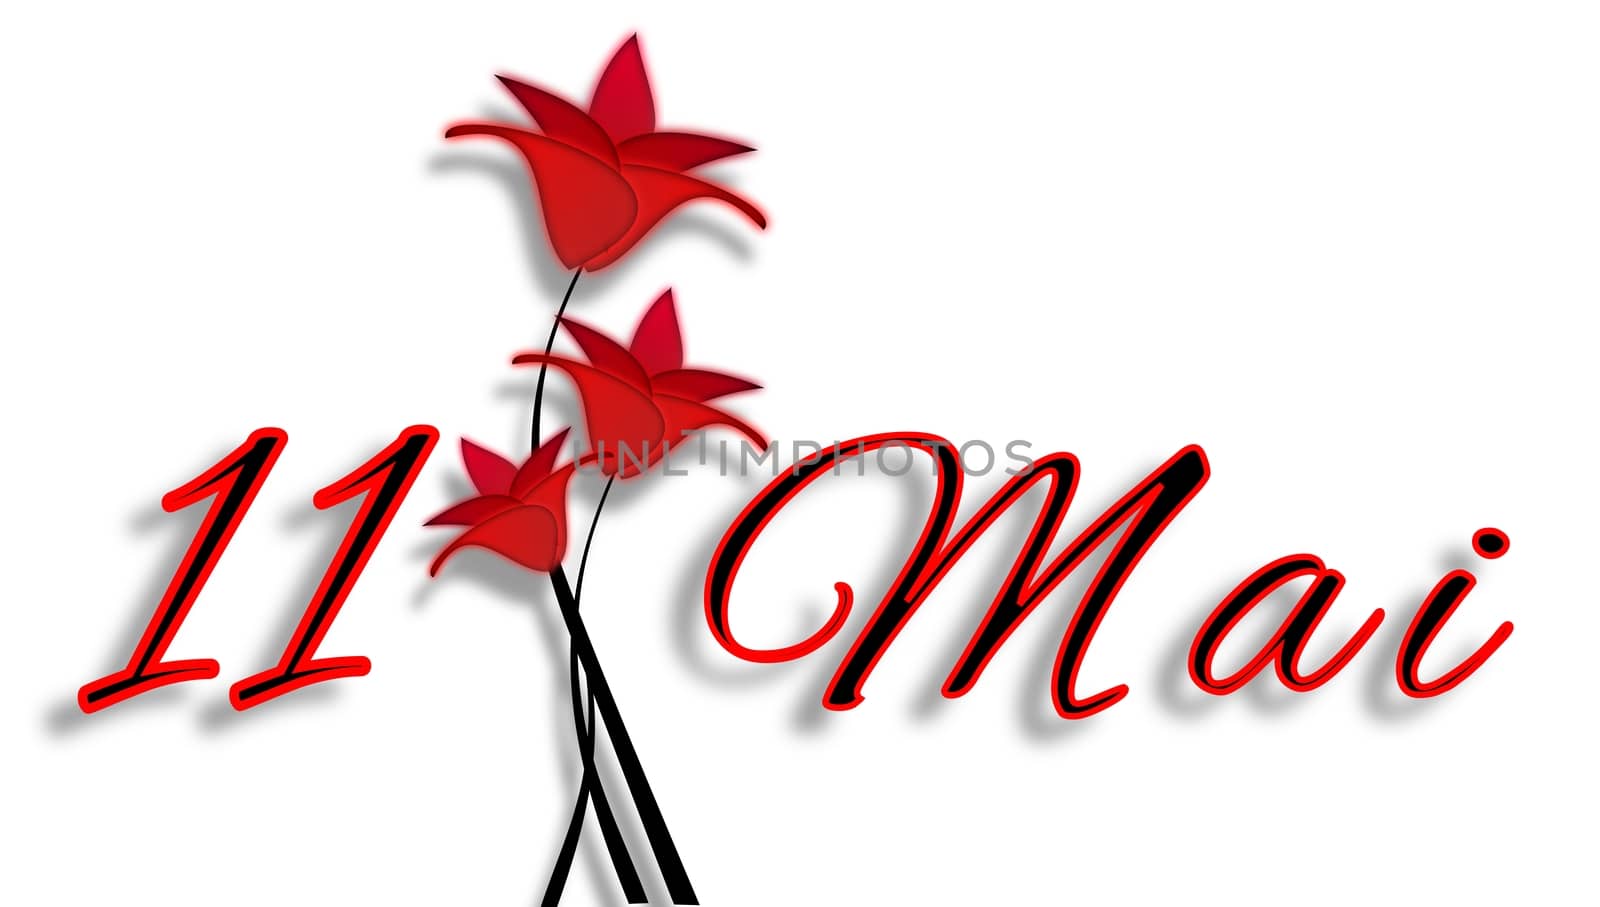 Mother's Day on May 11th with red flowers isolated on a white background